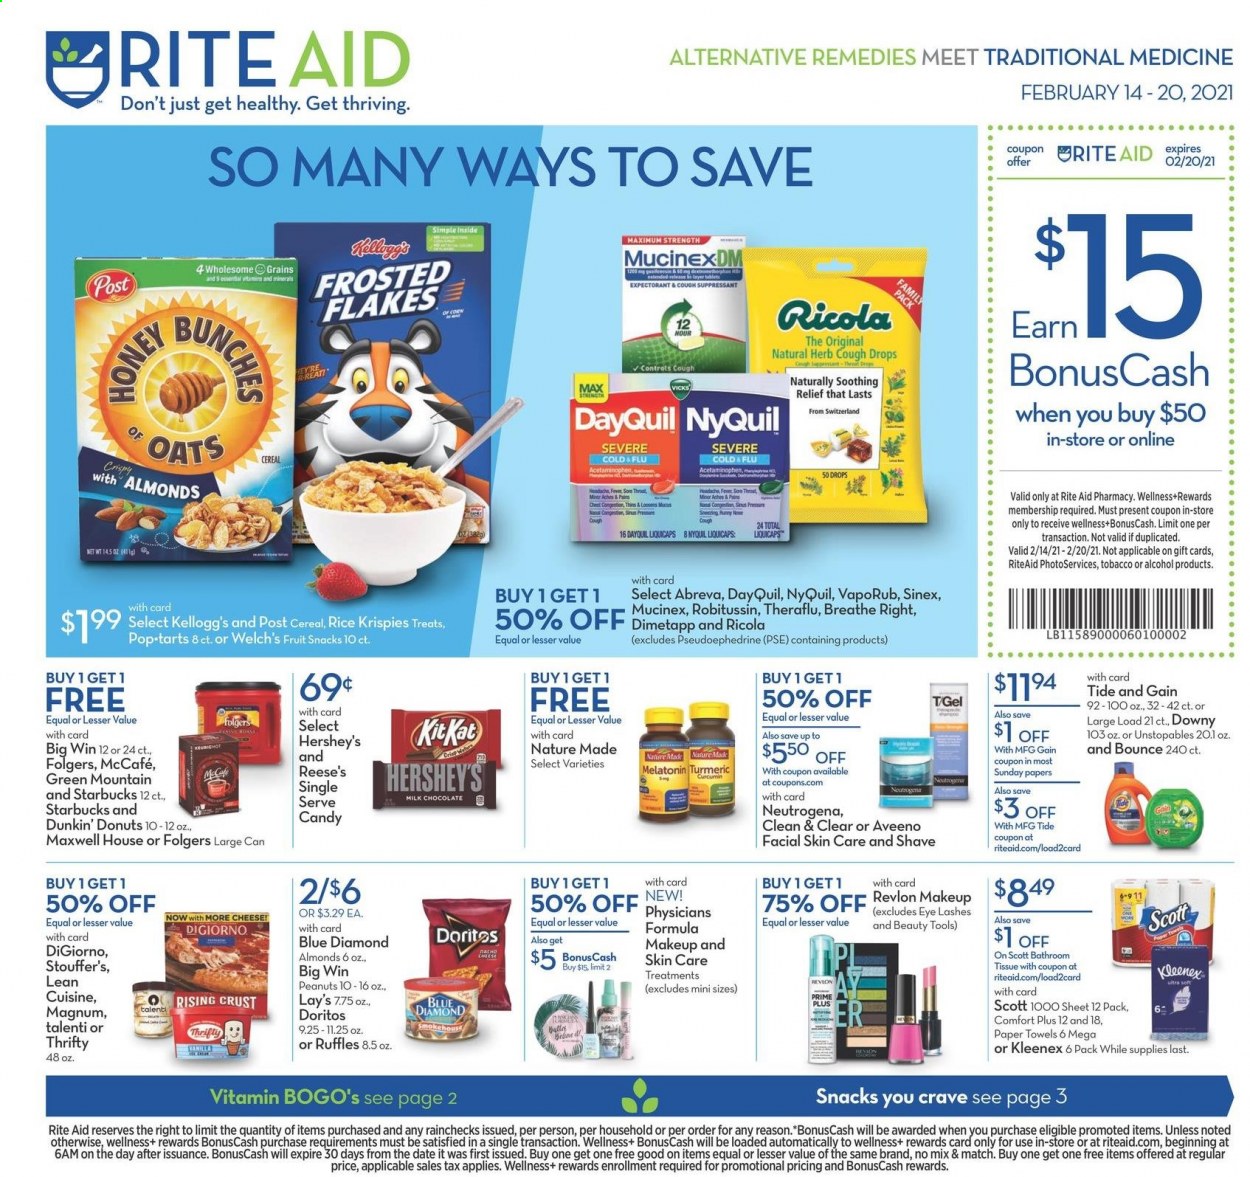 thumbnail - RITE AID Flyer - 02/14/2021 - 02/20/2021 - Sales products - Scott, Lean Cuisine, Welch's, Magnum, Reese's, Hershey's, Talenti Gelato, milk chocolate, ricola, chocolate, Kellogg's, Pop-Tarts, fruit snack, Doritos, Lay’s, Ruffles, oats, cereals, Rice Krispies, Frosted Flakes, turmeric, herbs, almonds, peanuts, Blue Diamond, Maxwell House, Starbucks, Folgers, McCafe, Dunkin' Donuts, Green Mountain, alcohol, Aveeno, bath tissue, Kleenex, tissues, kitchen towels, paper towels, Gain, Tide, Unstopables, Bounce, Abreva, Neutrogena, Clean & Clear, Revlon, Brite, makeup, bunches, DayQuil, Dimetapp, Melatonin, Mucinex, Nature Made, Robitussin, Theraflu, NyQuil, VapoRub, cough drops, Sinex, donut. Page 1.